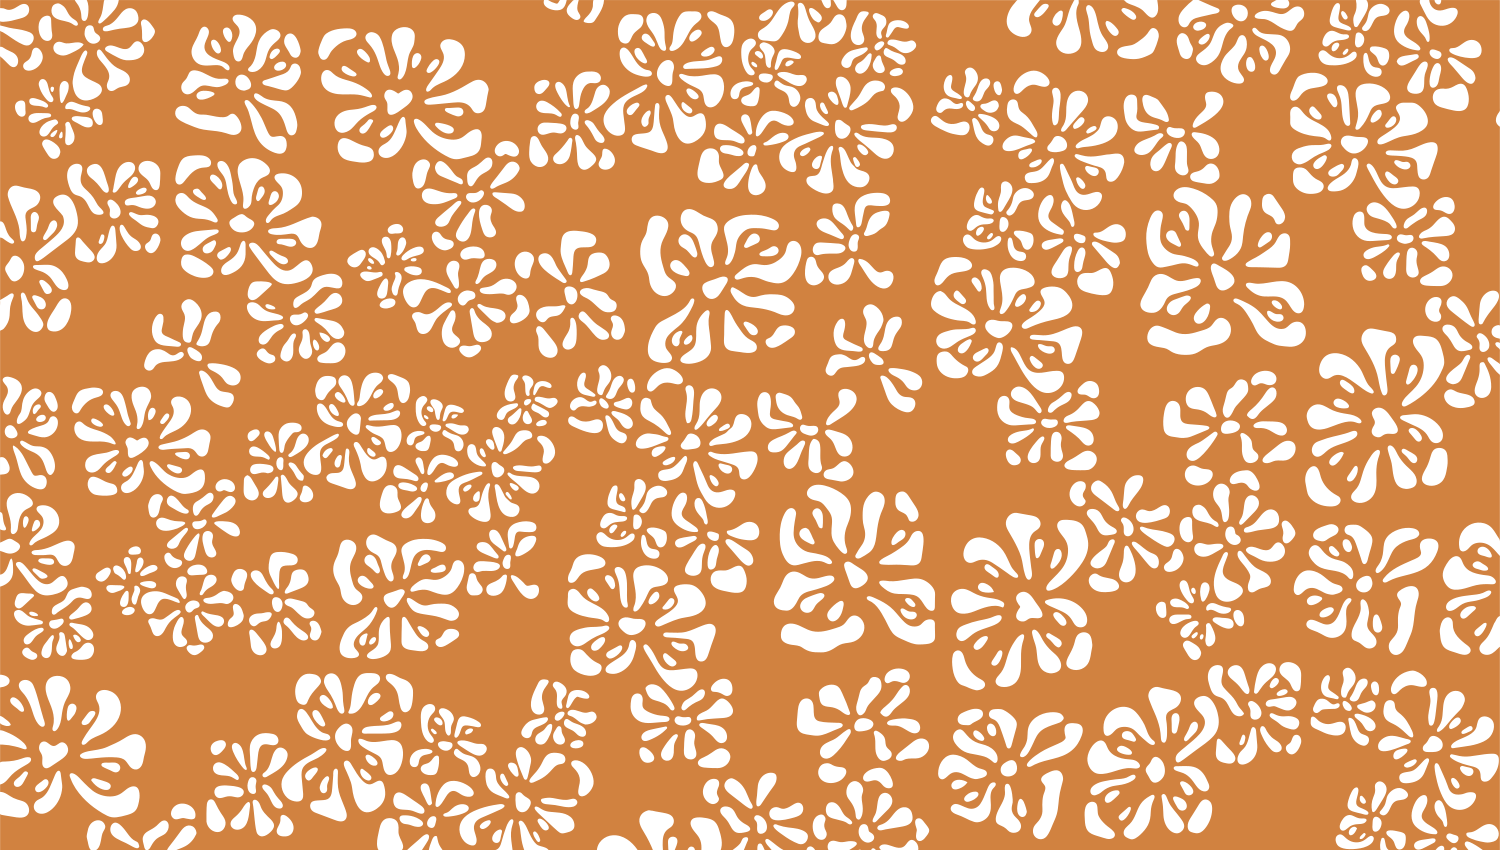 Parasoleil™ Magnolia© pattern displayed with a ochre color overlay